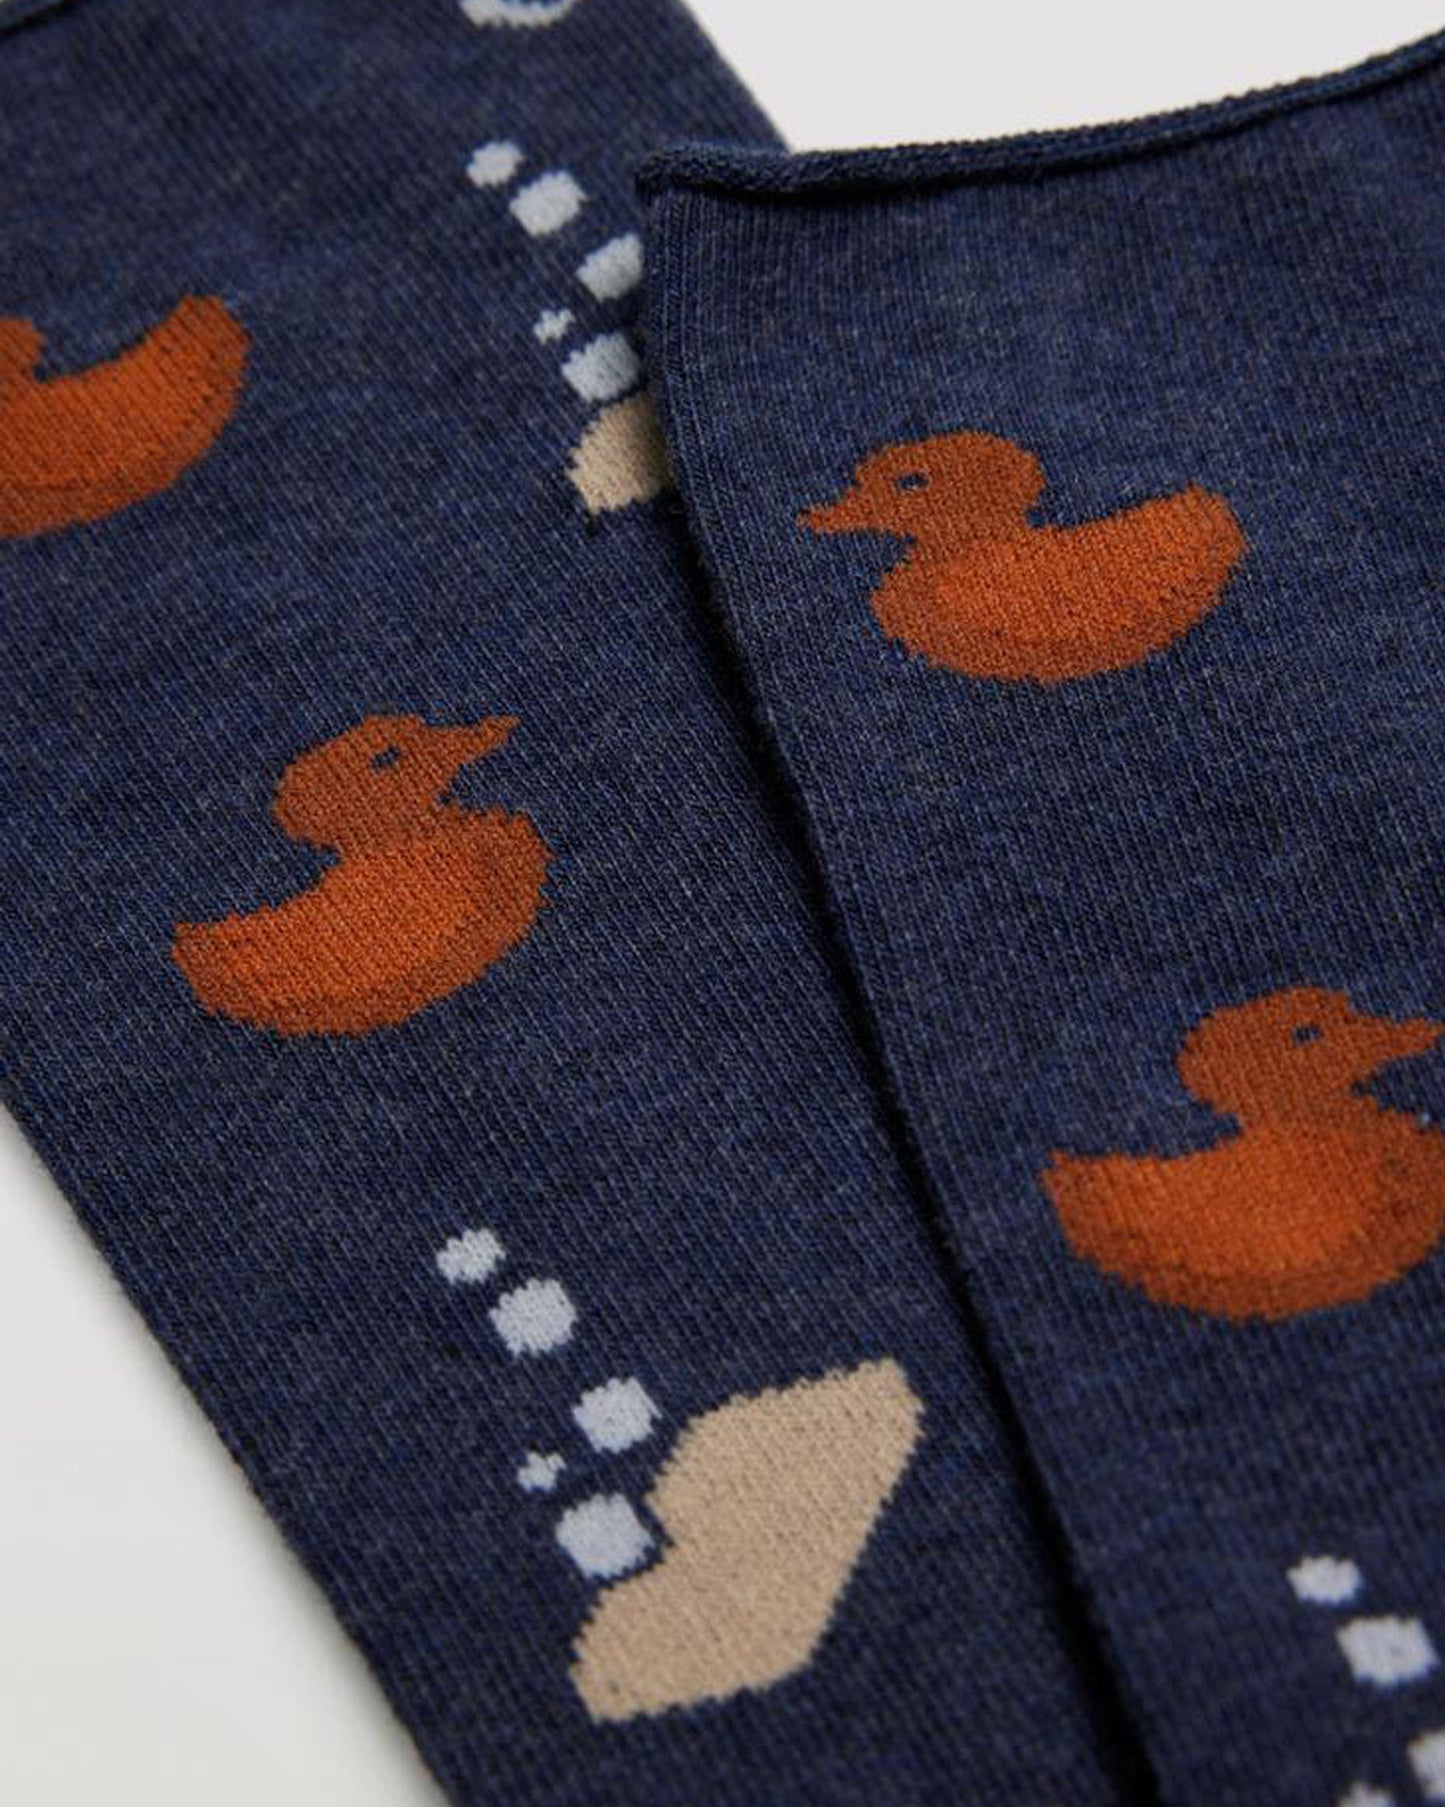 Denim blue cotton mix crew length ankle socks with a rusty orange rubber duck and sudsy soap pattern, black heel and toe and no cuff comfort top.